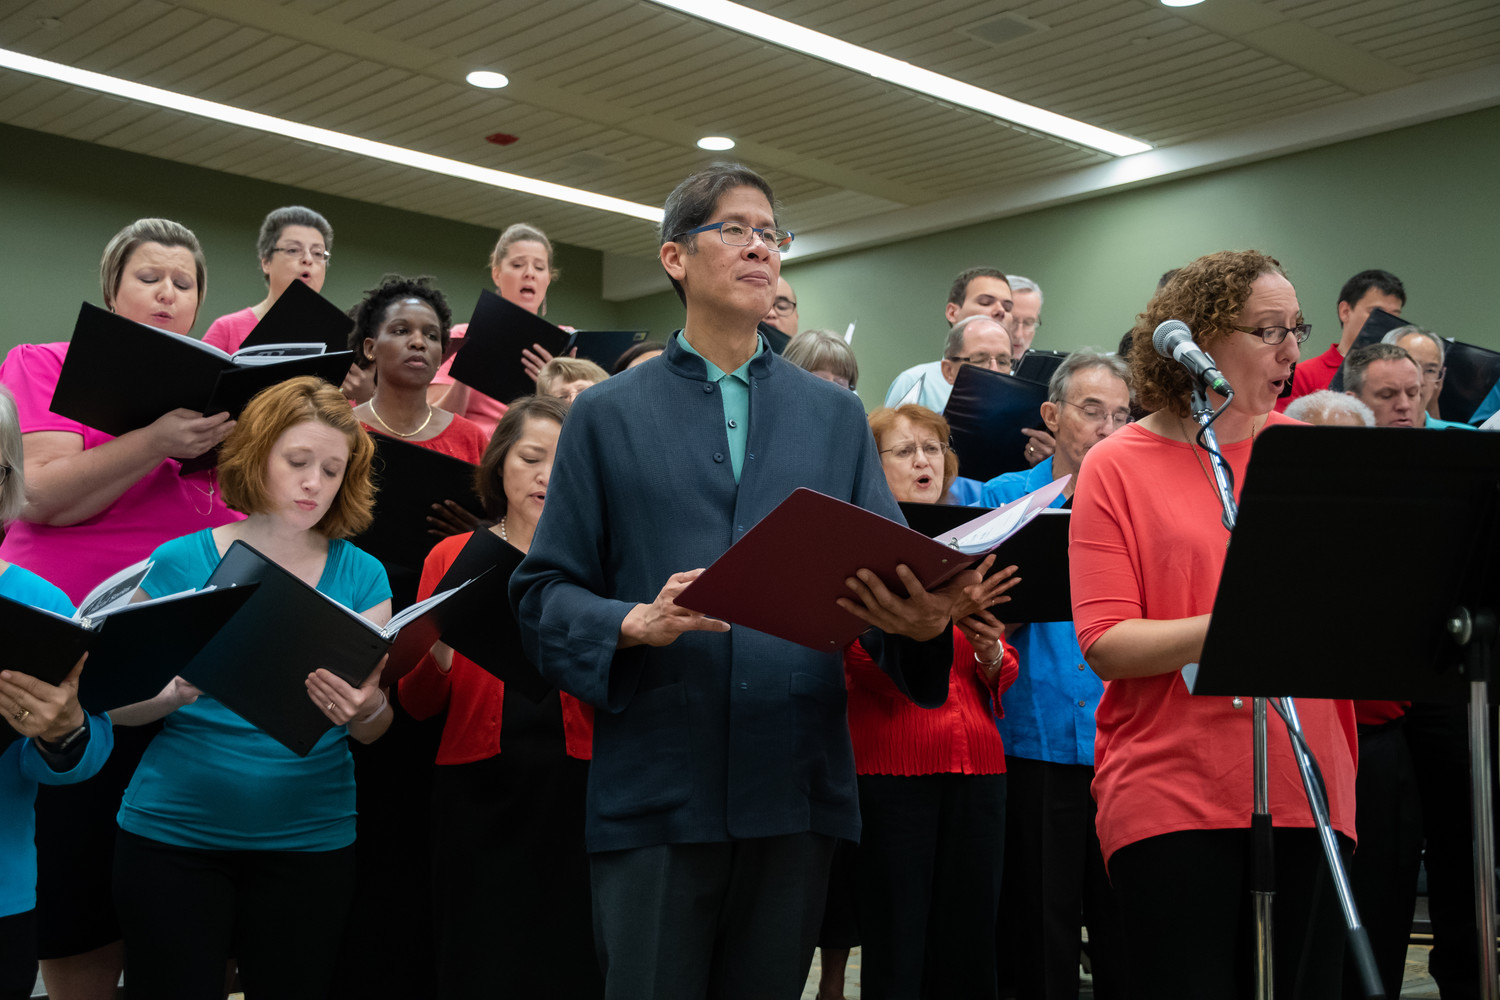 Paulist Father Ricky Manalo rehearses with a combined choir from the Baltimore and Washington archdioceses July 12 during the National Association of Pastoral Musicians convention in Baltimore July 12. The association named the priest Pastoral Musician of the Year.